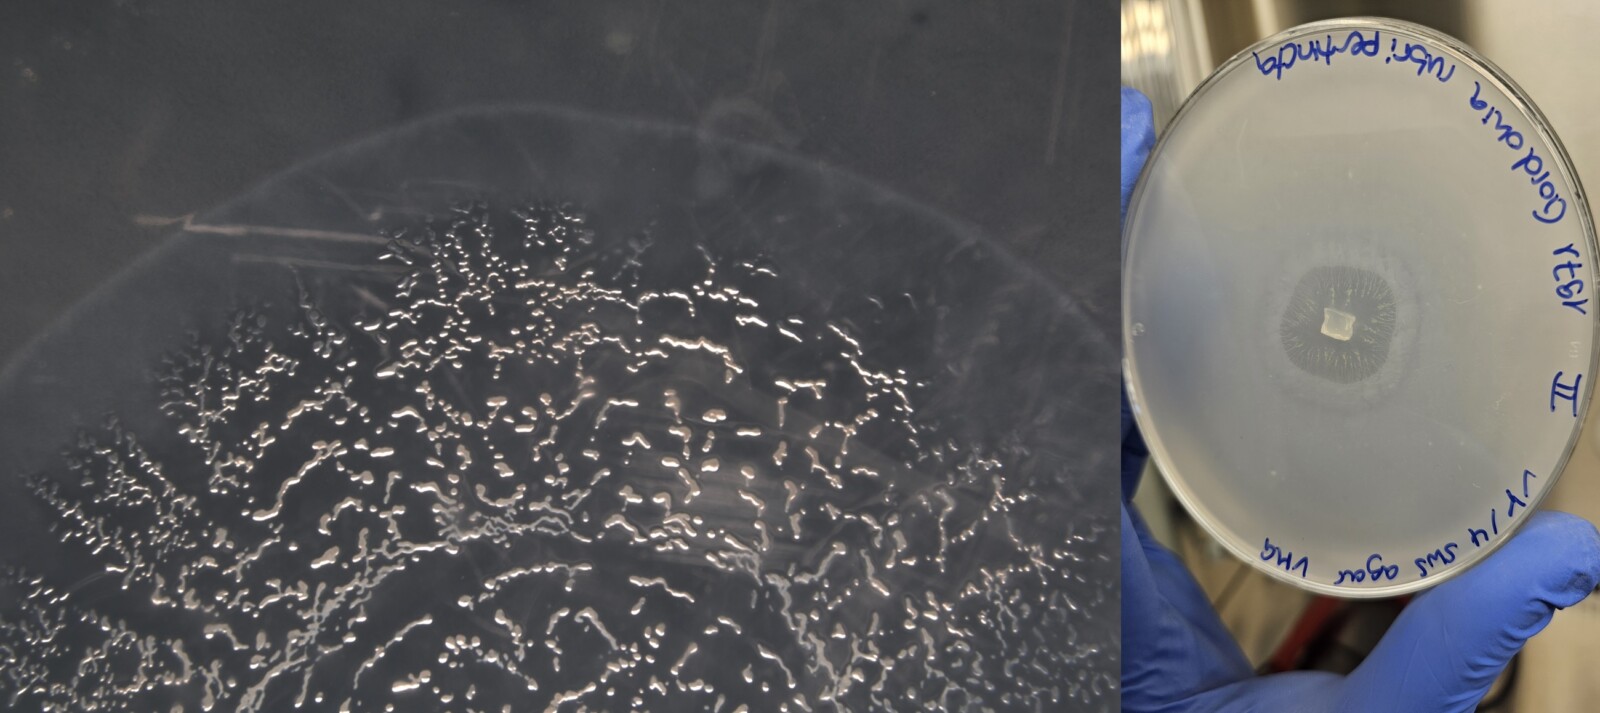 Two photos of a petri dish with a pattern that starts from the middle